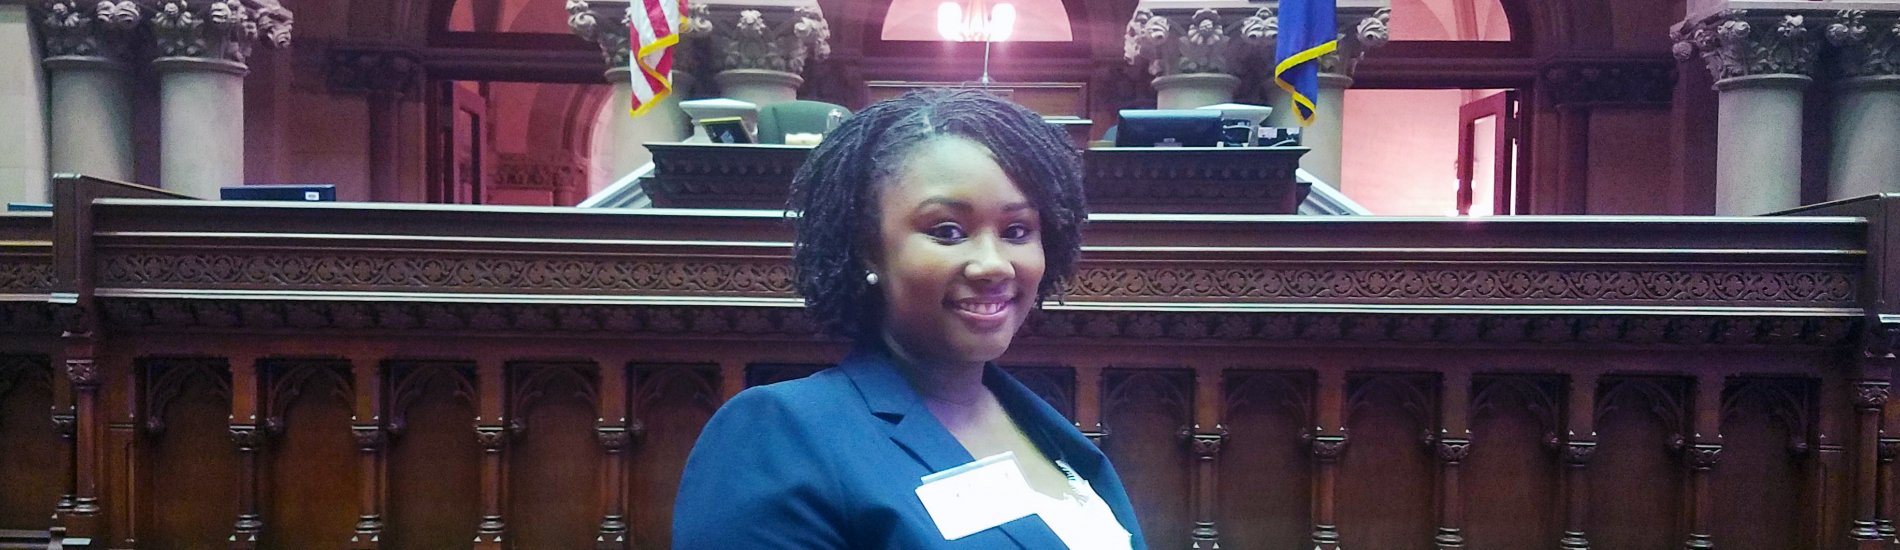 A UAlbany student working as a government intern in the New York State Capitol building.